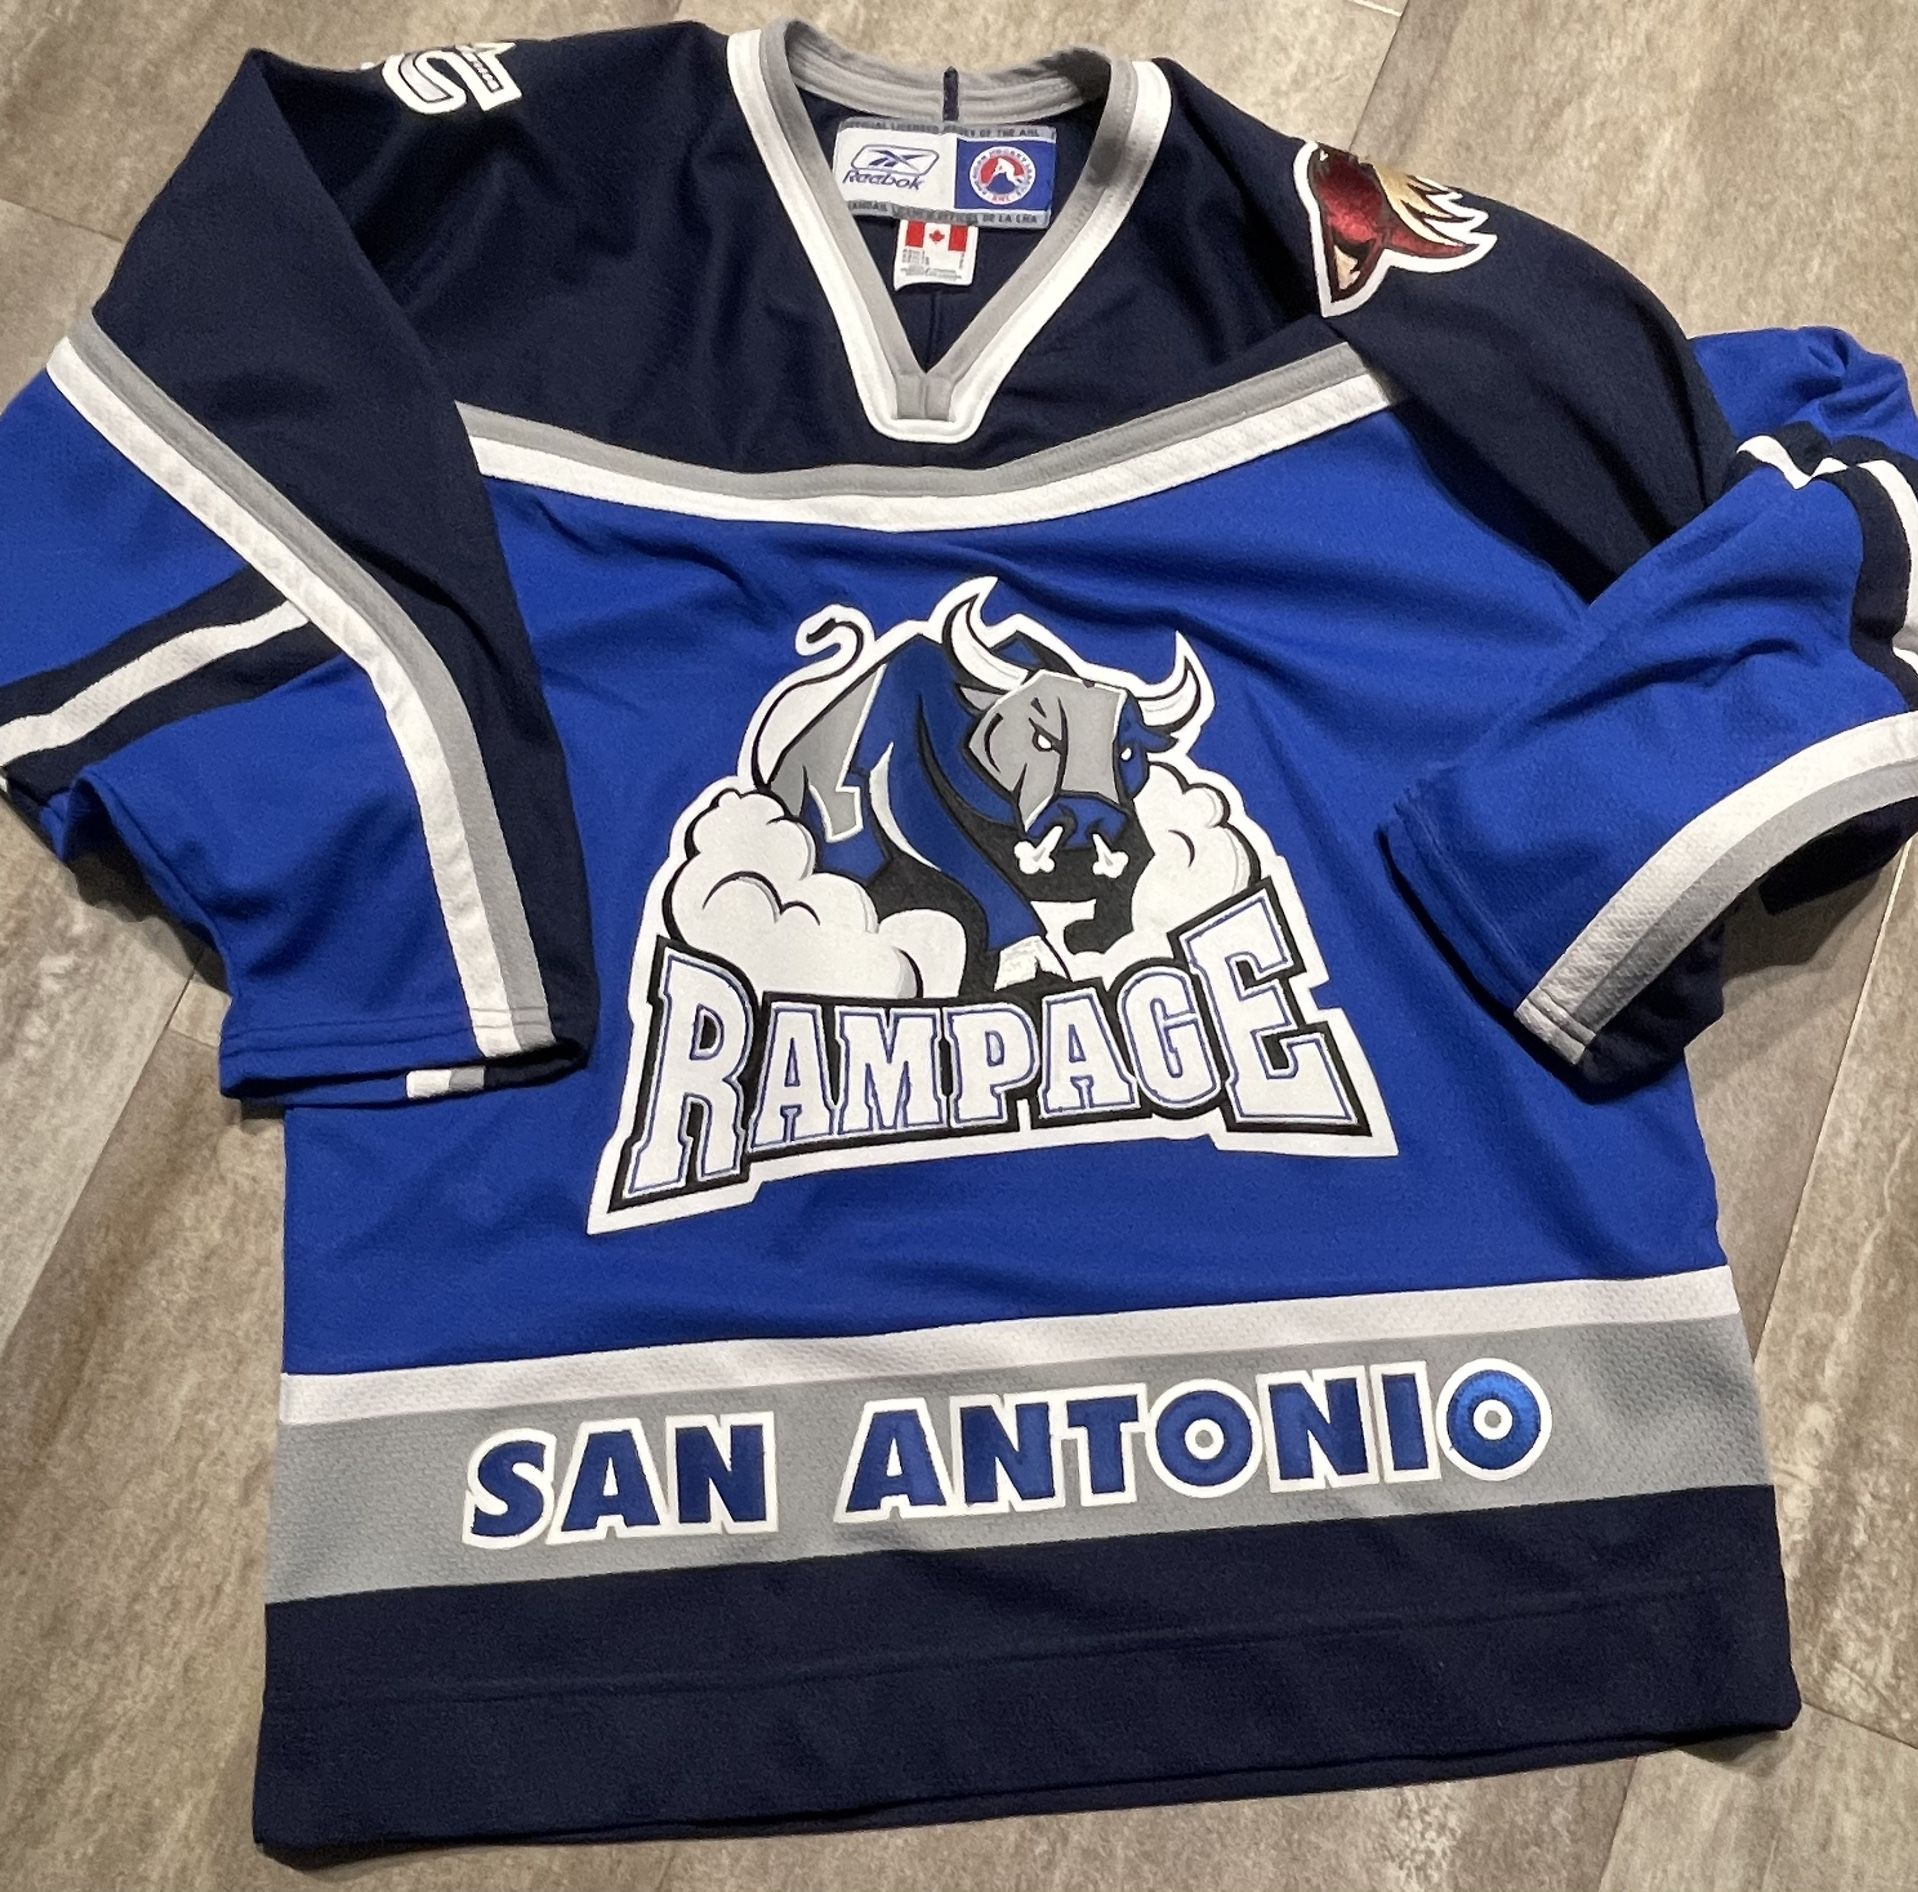 San Antonio Rampage unveil the nicest Star Wars themed jerseys you